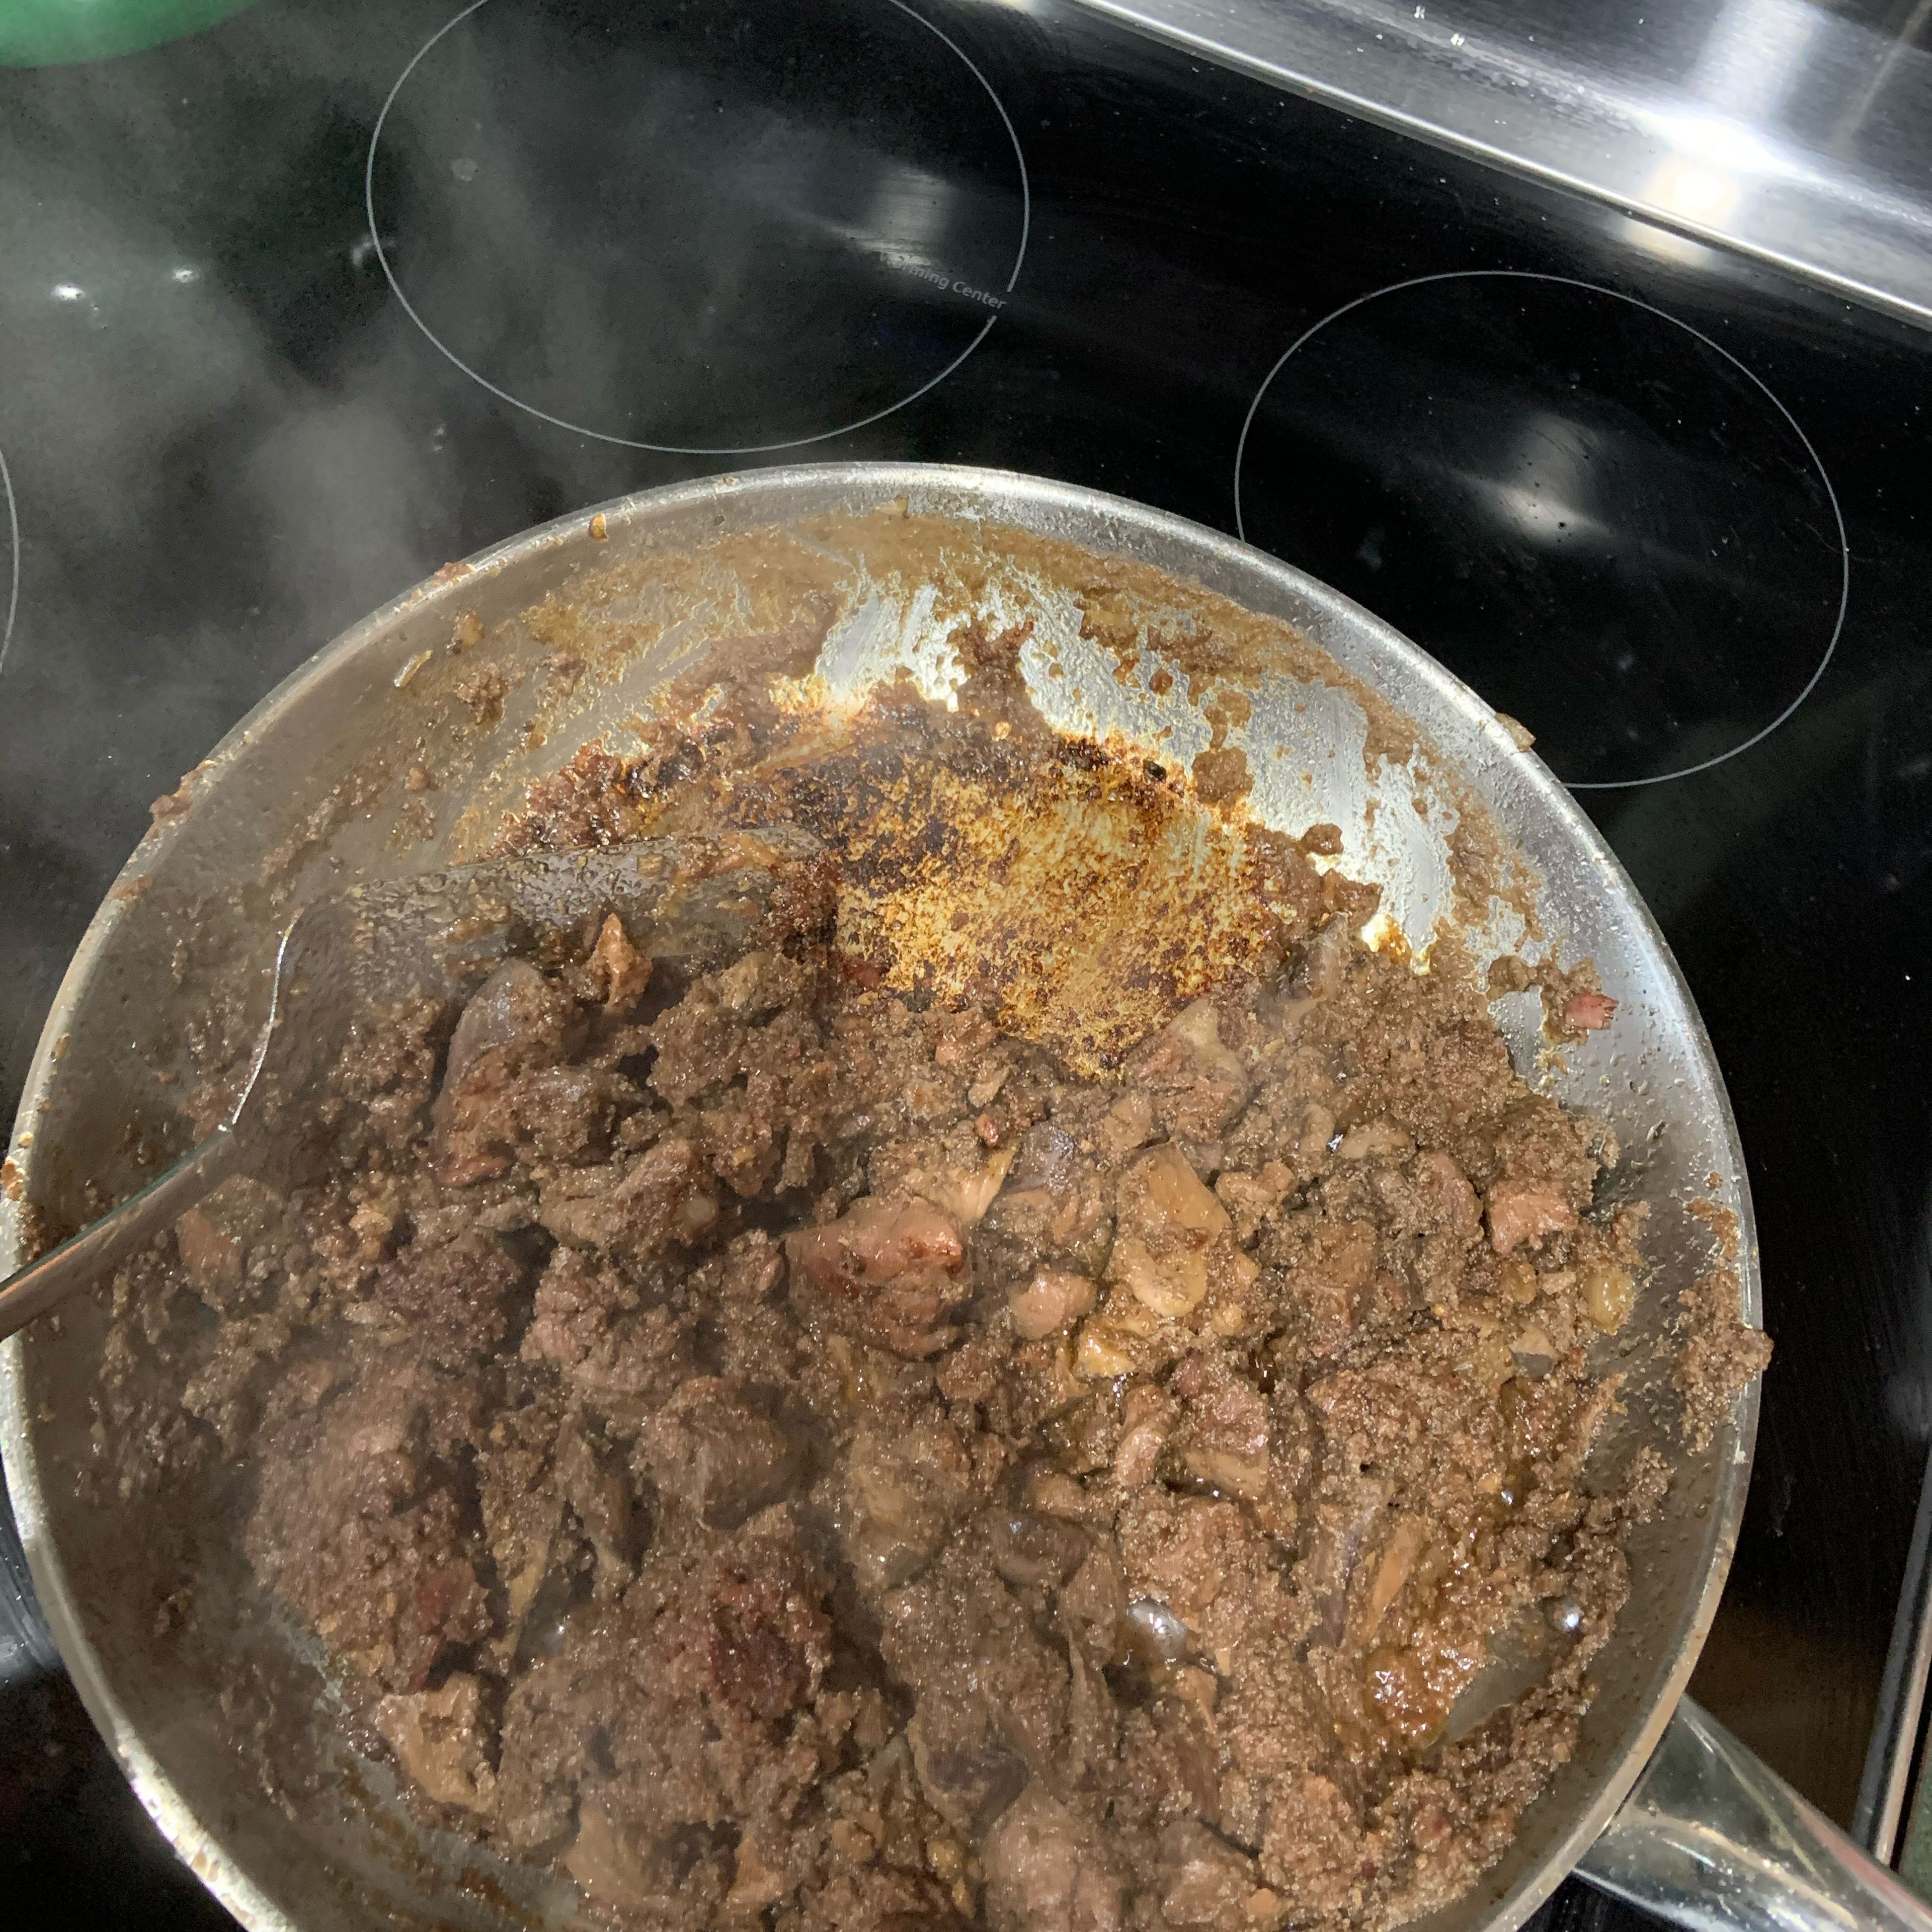 Chop the liver. Than add to grease pan. Star to brown the liver use a medium heat. After a minute or two add the beer to the pan bring to a simmer. Once to a simmer add the blended bacon and onions to the mixture. Stir and simmer until the beer is completely evaporated.